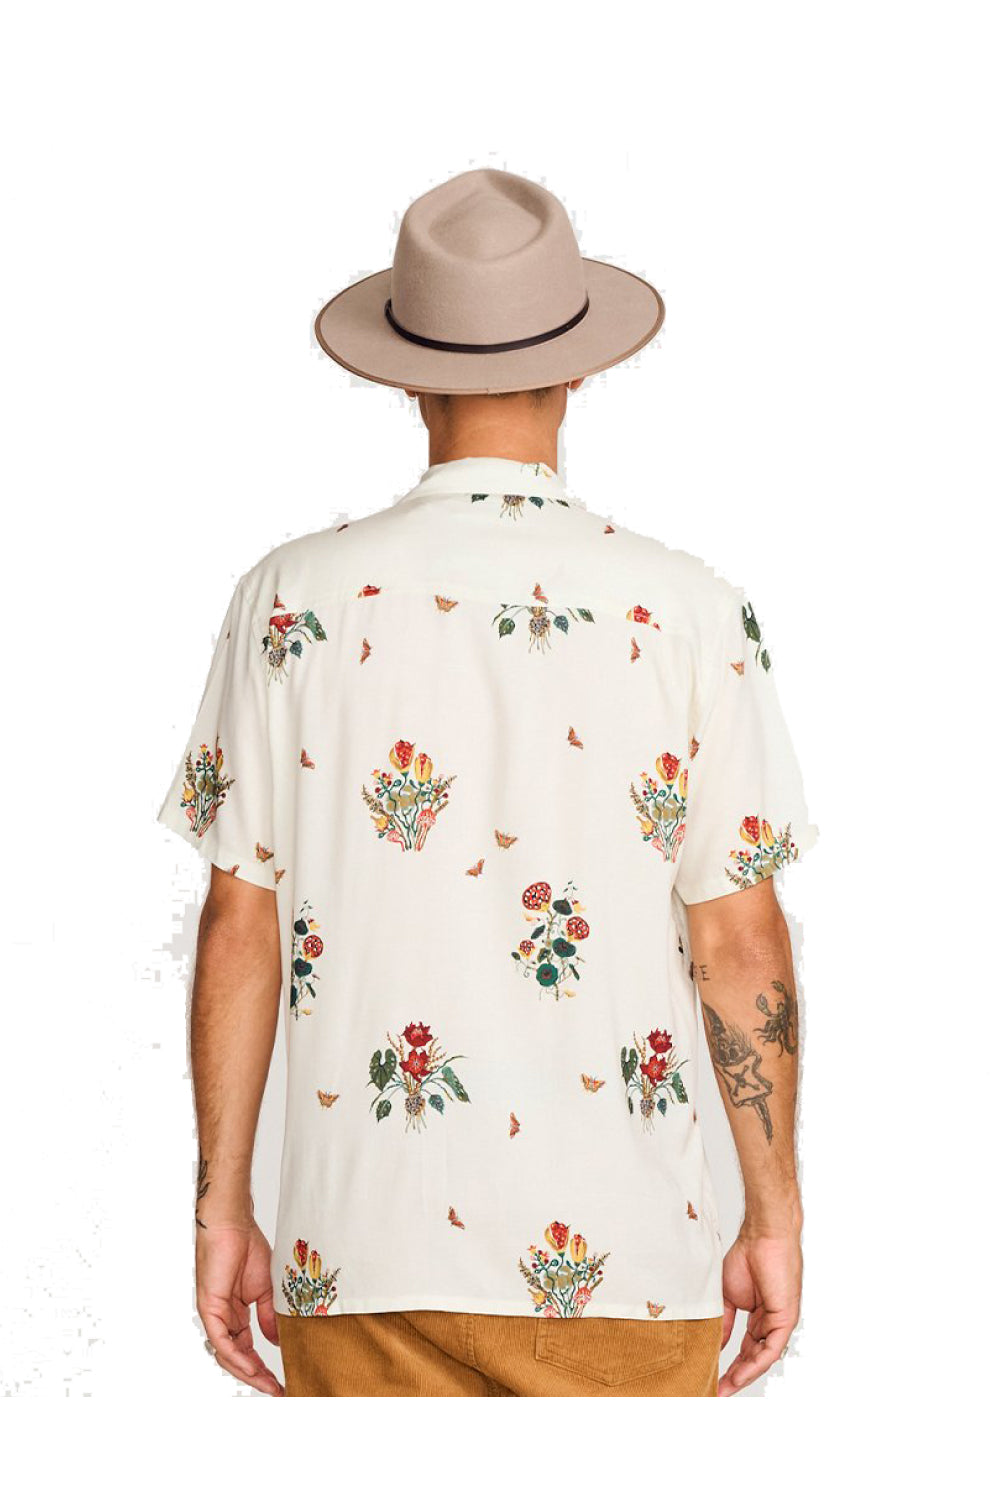 The Critical Slide Society Bouquets Shirt